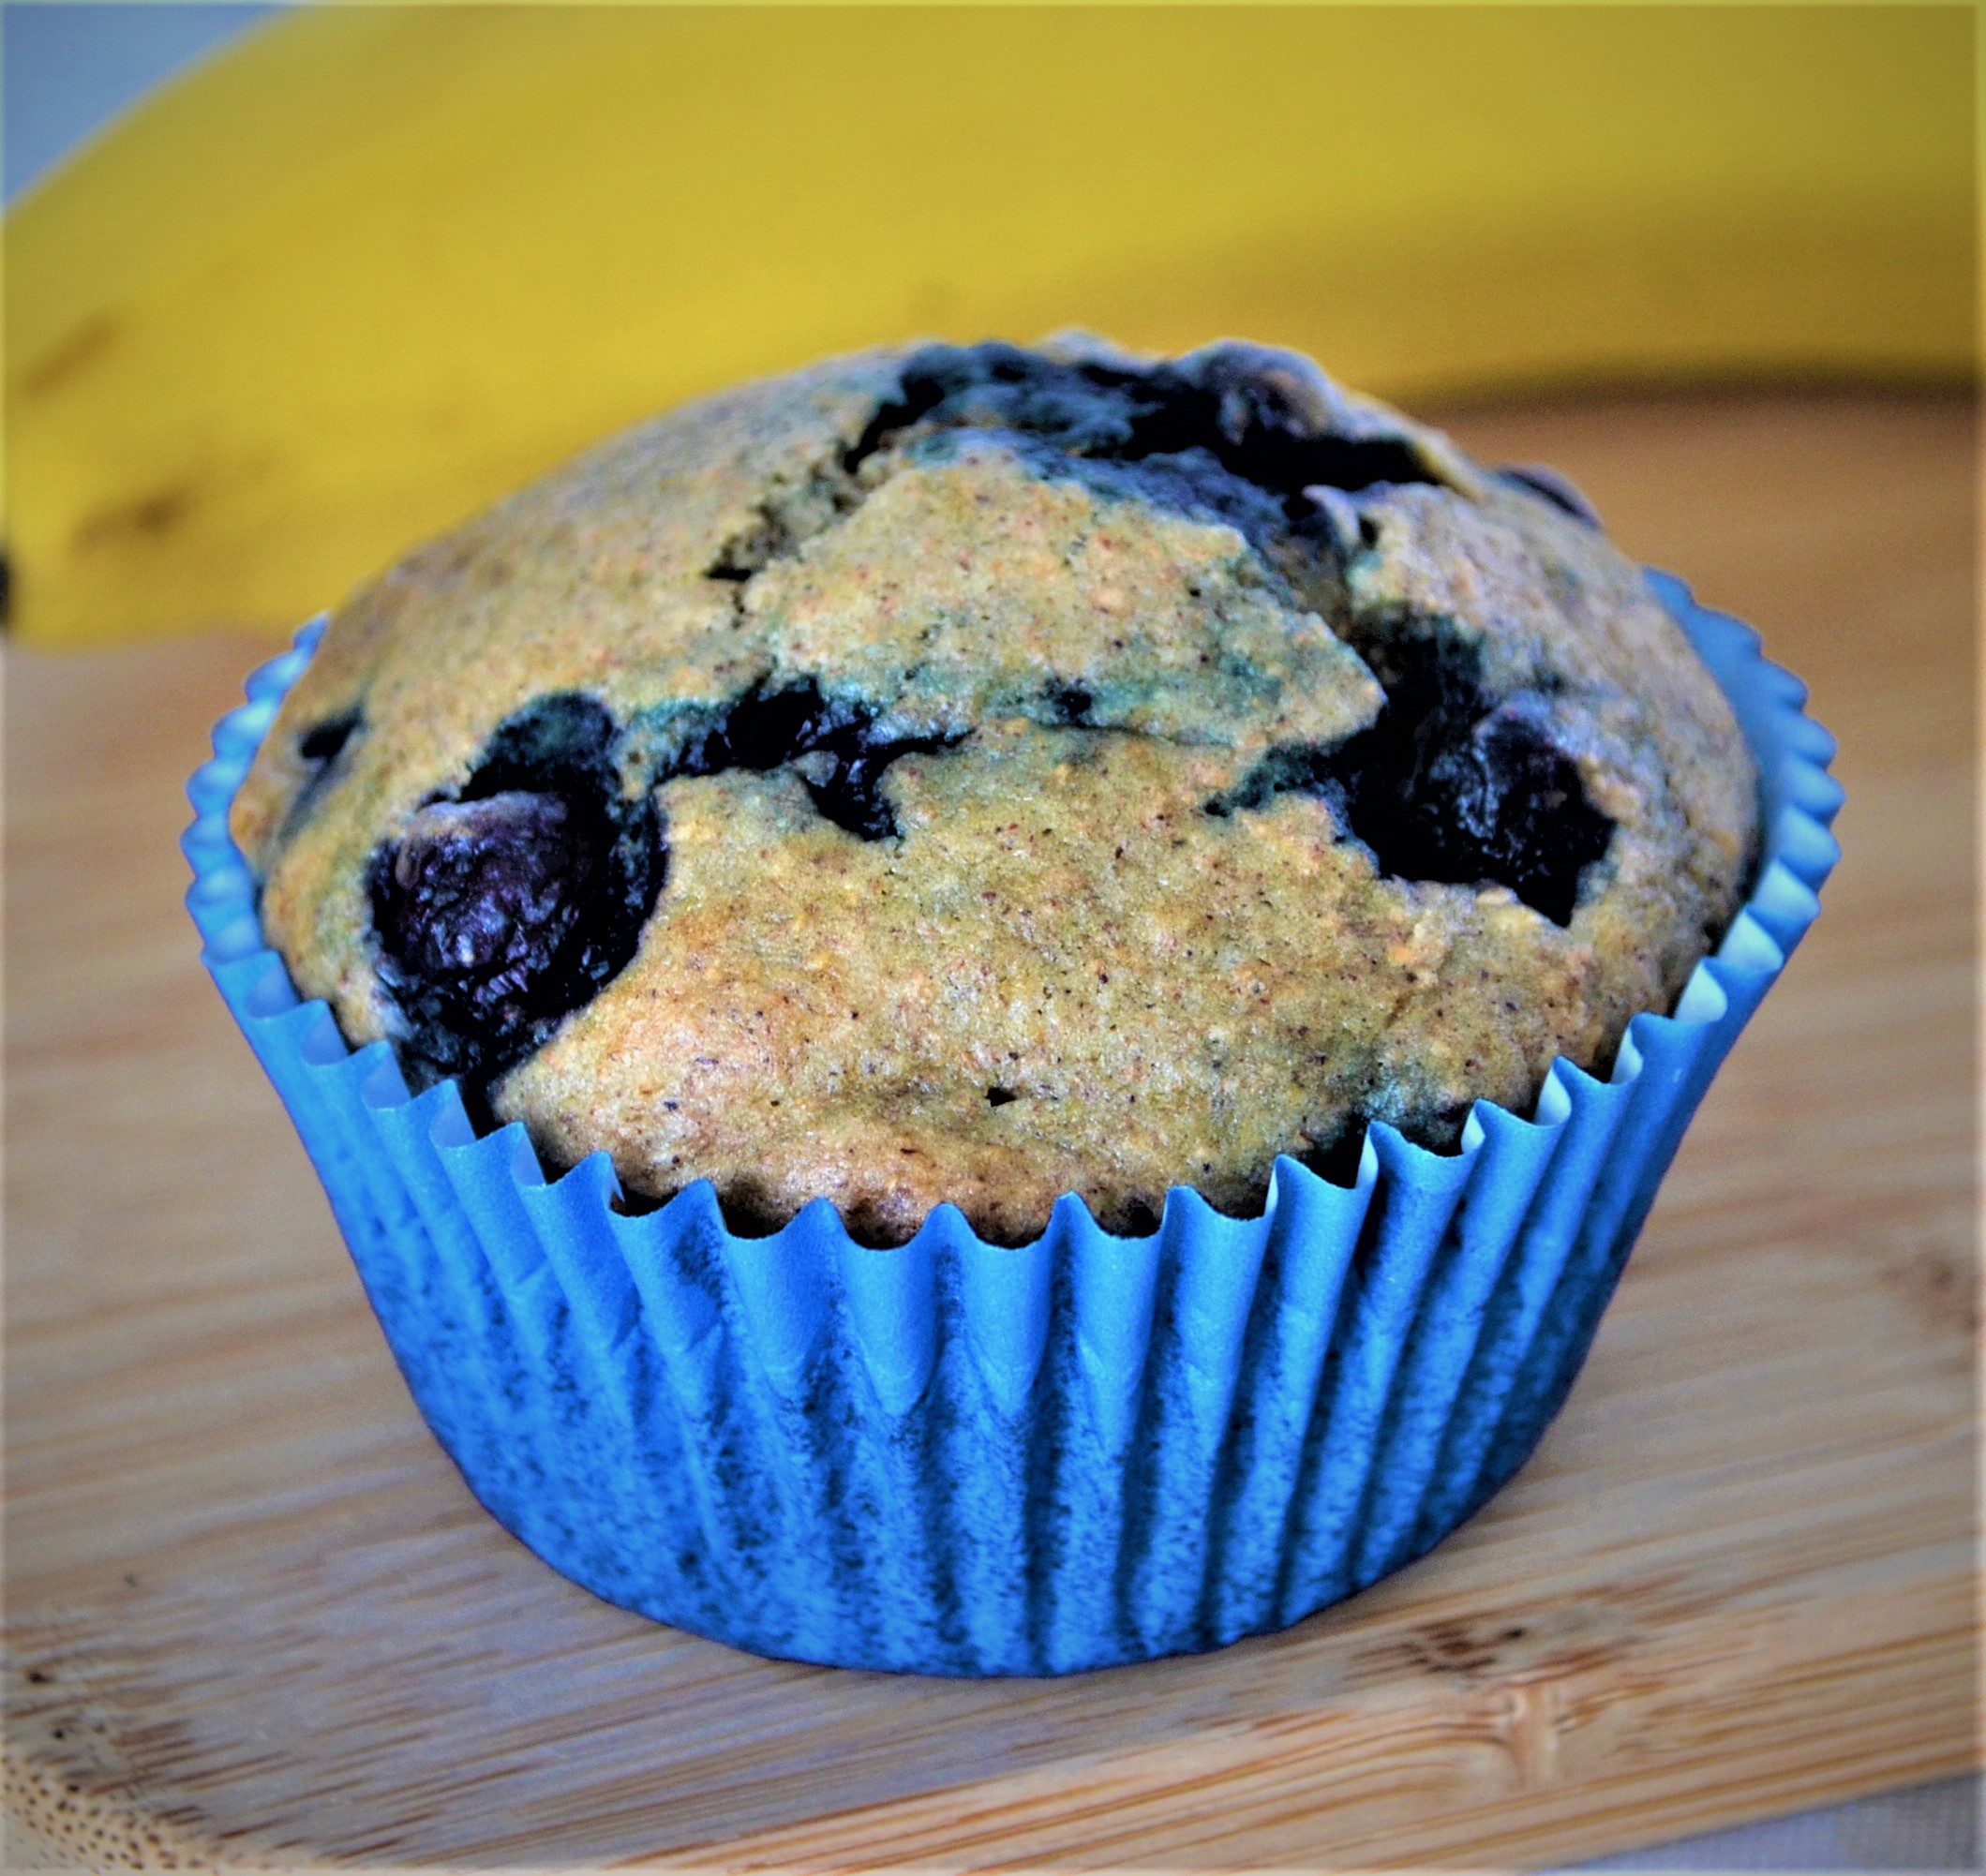 Lactose-Free Banana and Blueberry Muffins